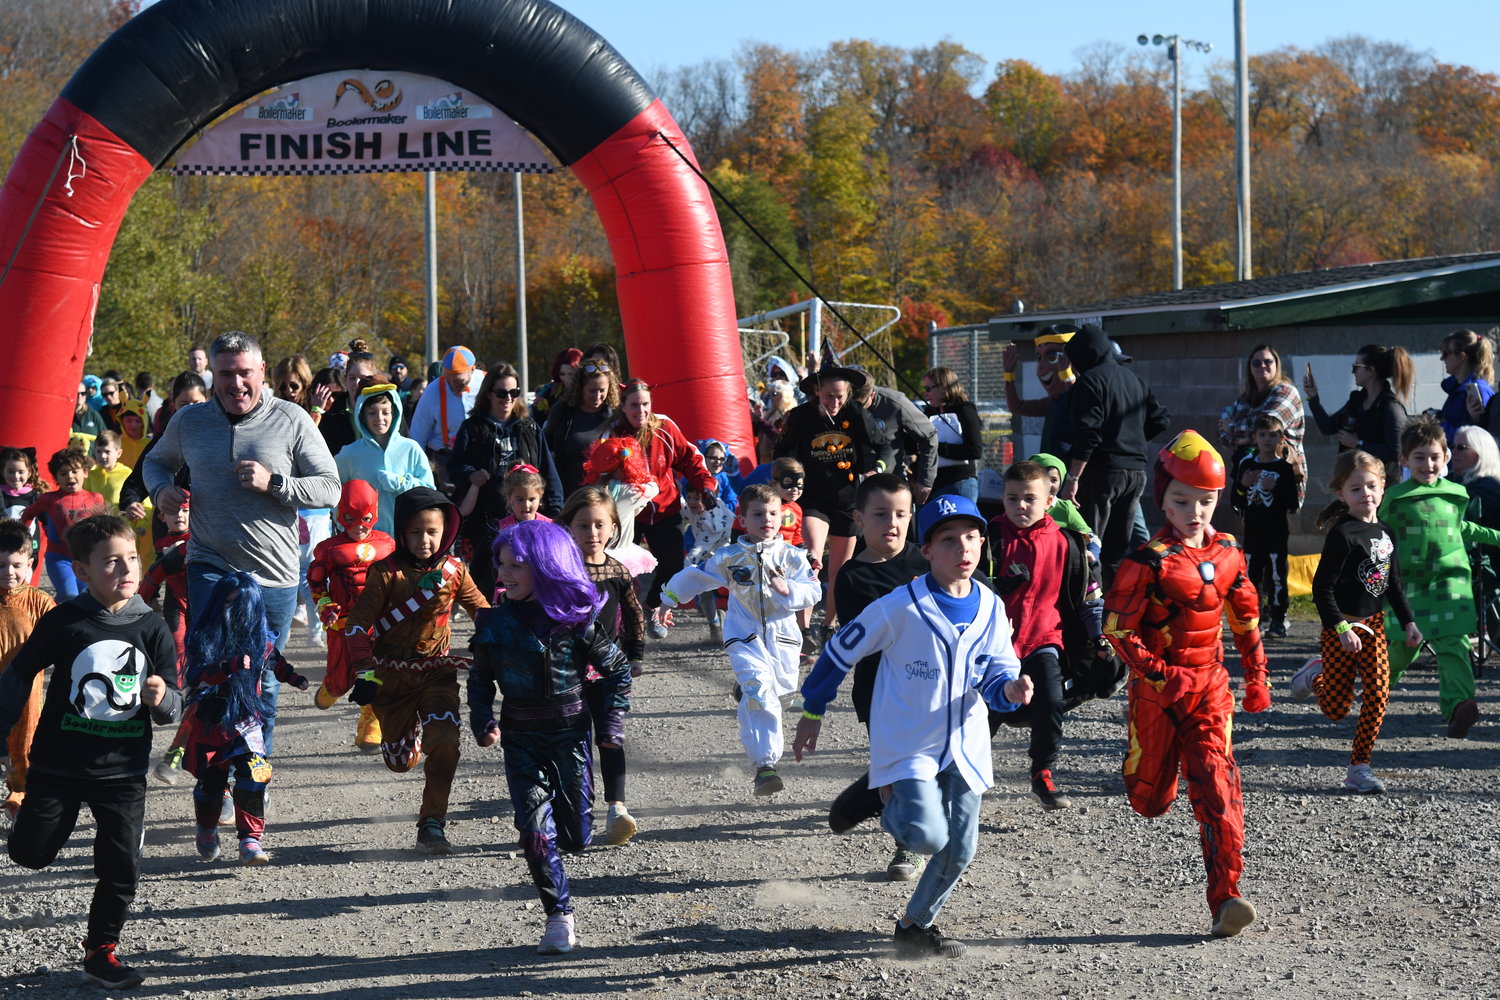 On Saturday, Oct. 22, the Boolermaker Kid's Run was held at Utica's TR Proctor Park. The run is one of many community events held throughout the year aside from the Boilermaker Roadrace. There were several distances for children to compete in depending on their age. Costumes were encouraged.